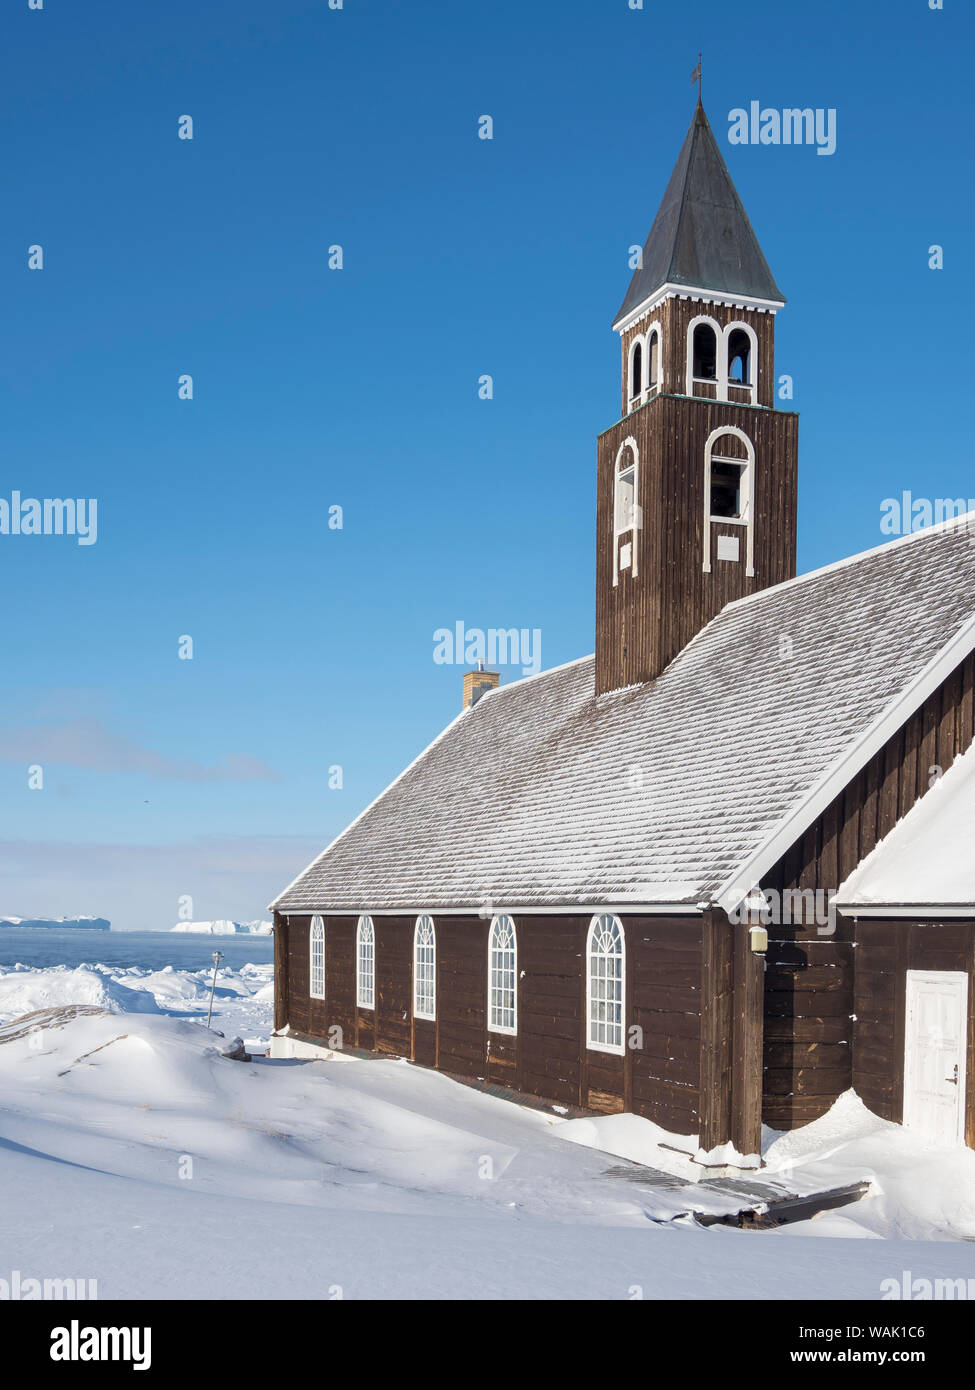 The Zion's Church. Greenland. (Editorial Use Only) Stock Photo